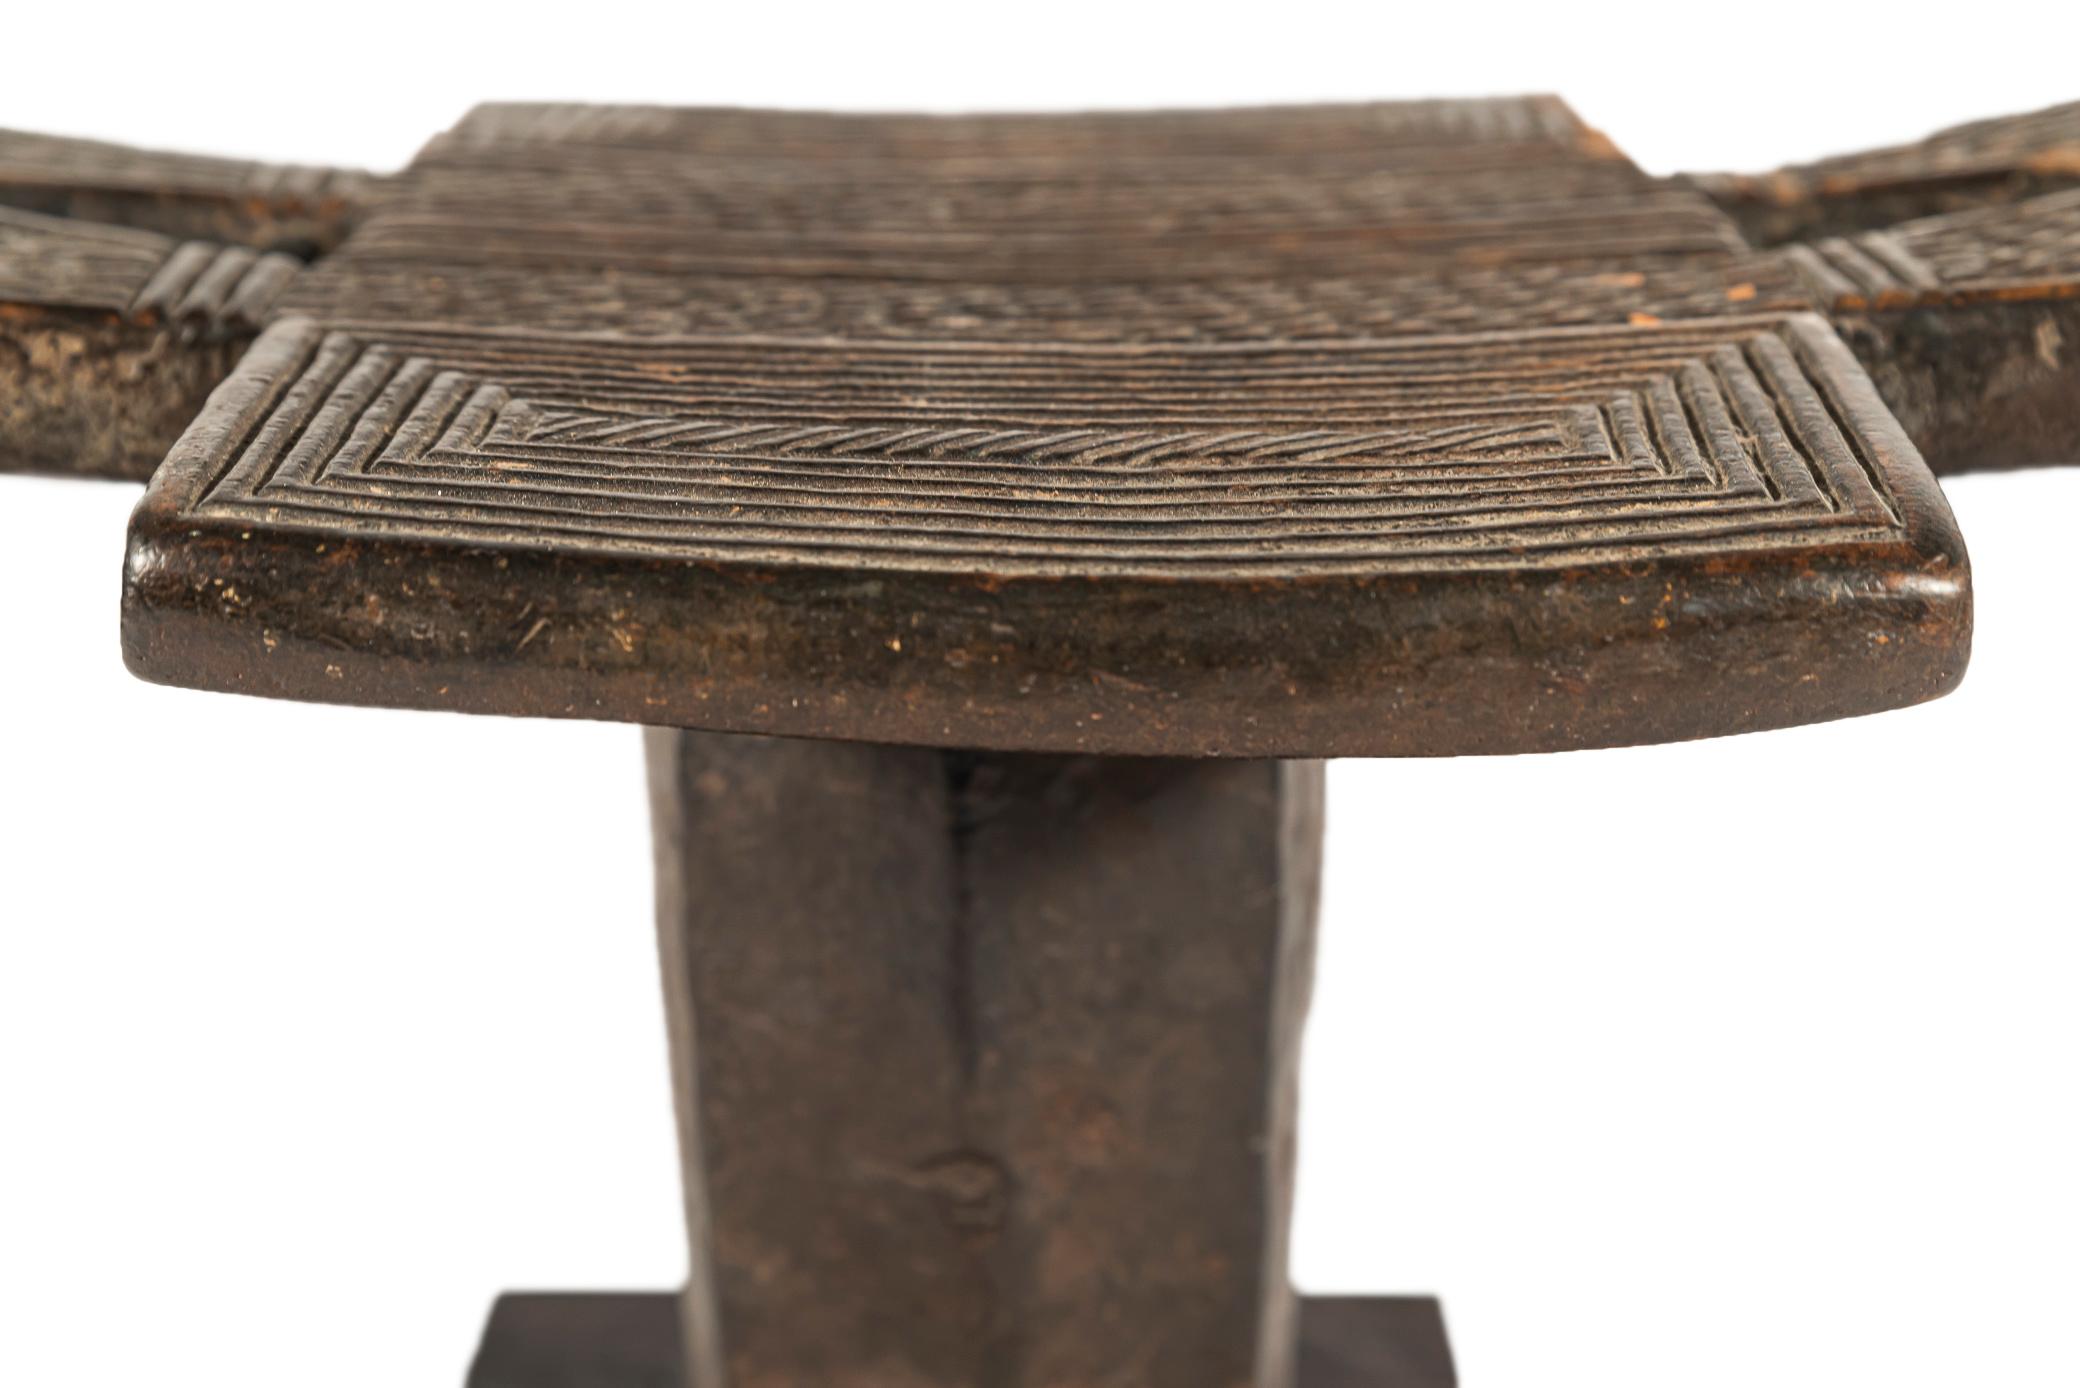 Wood Mongo Seating, Democratic Republic of the Congo, Early 20th Century